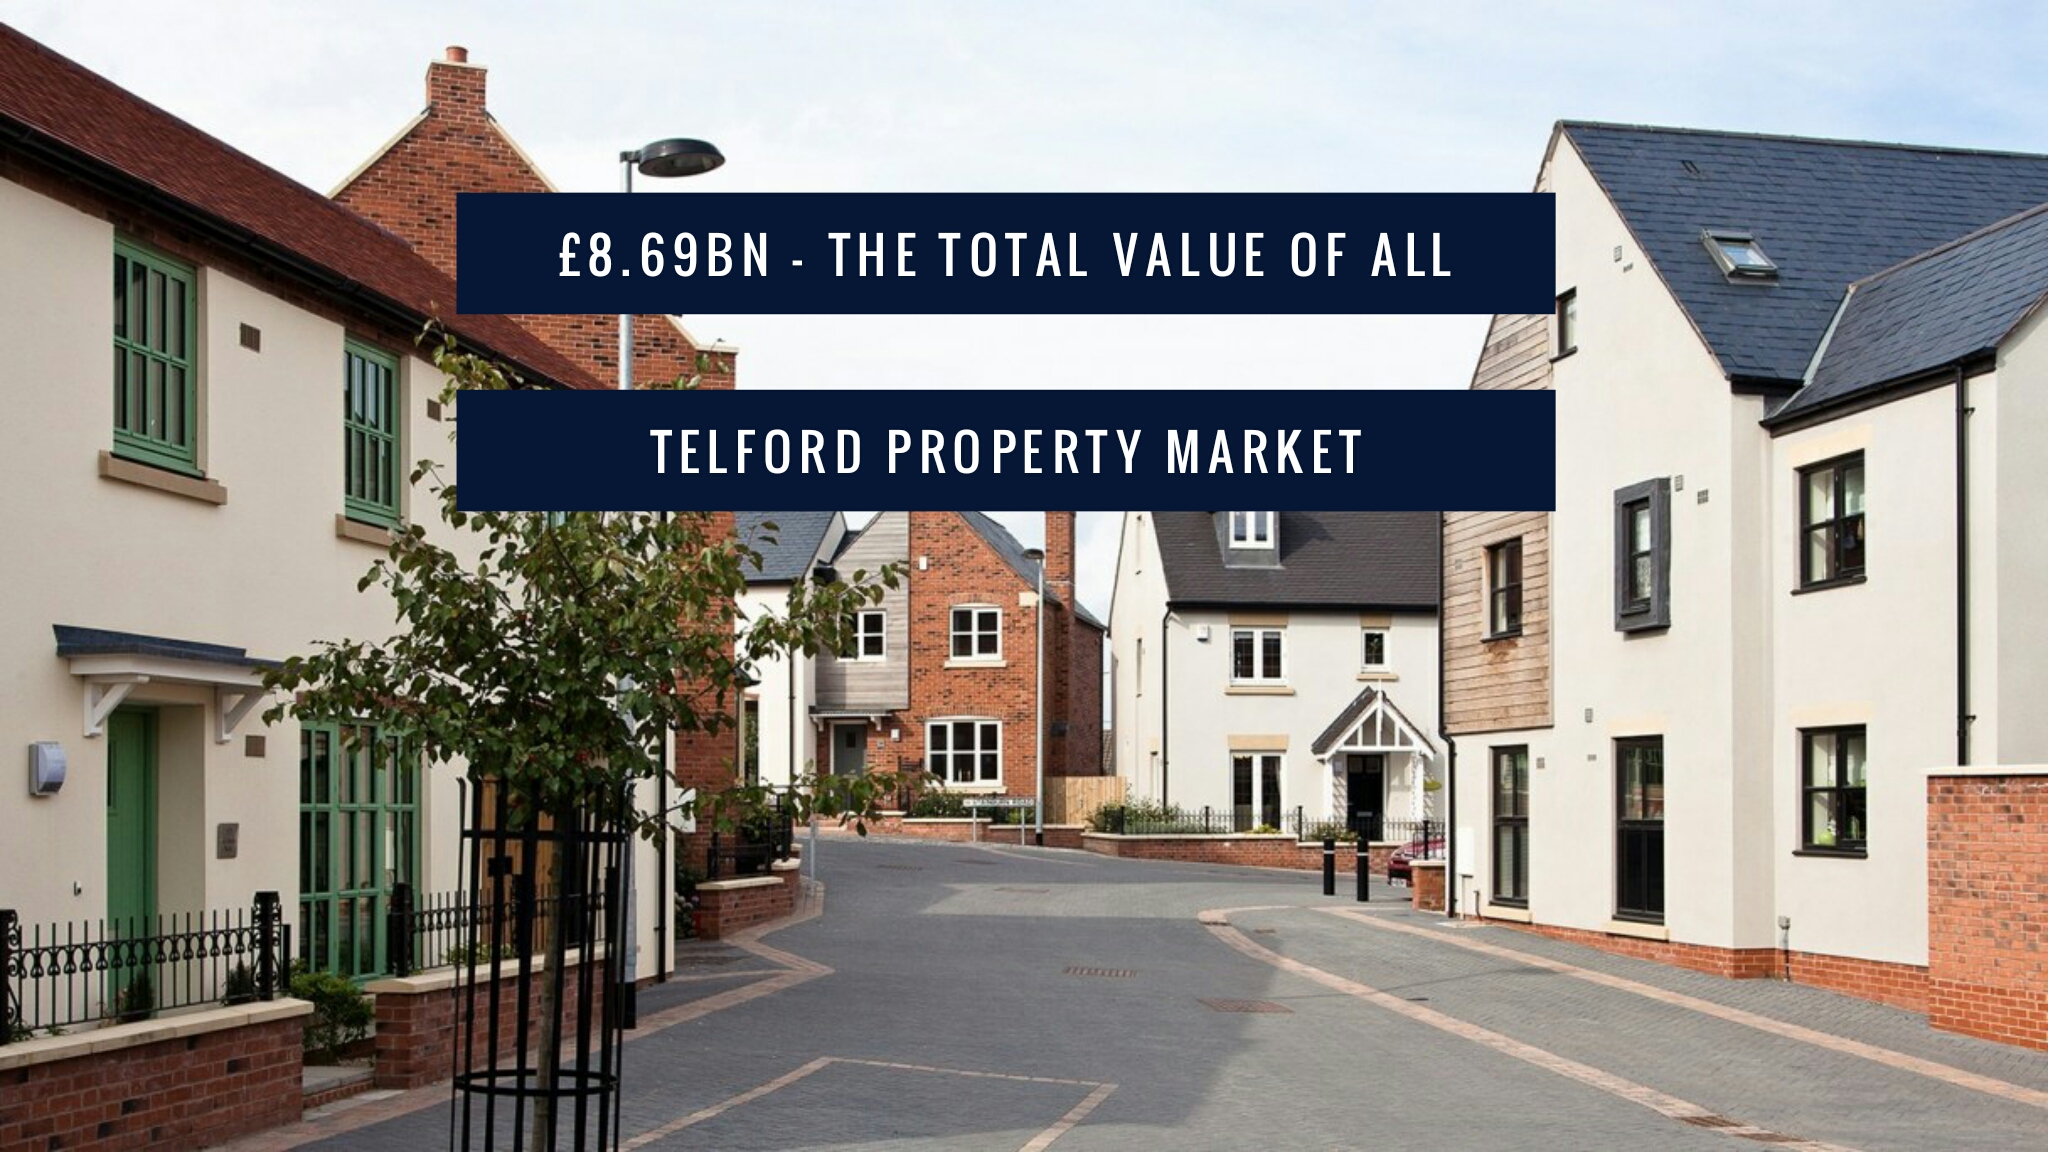 £8.69bn – The total value of all Telford Property Market